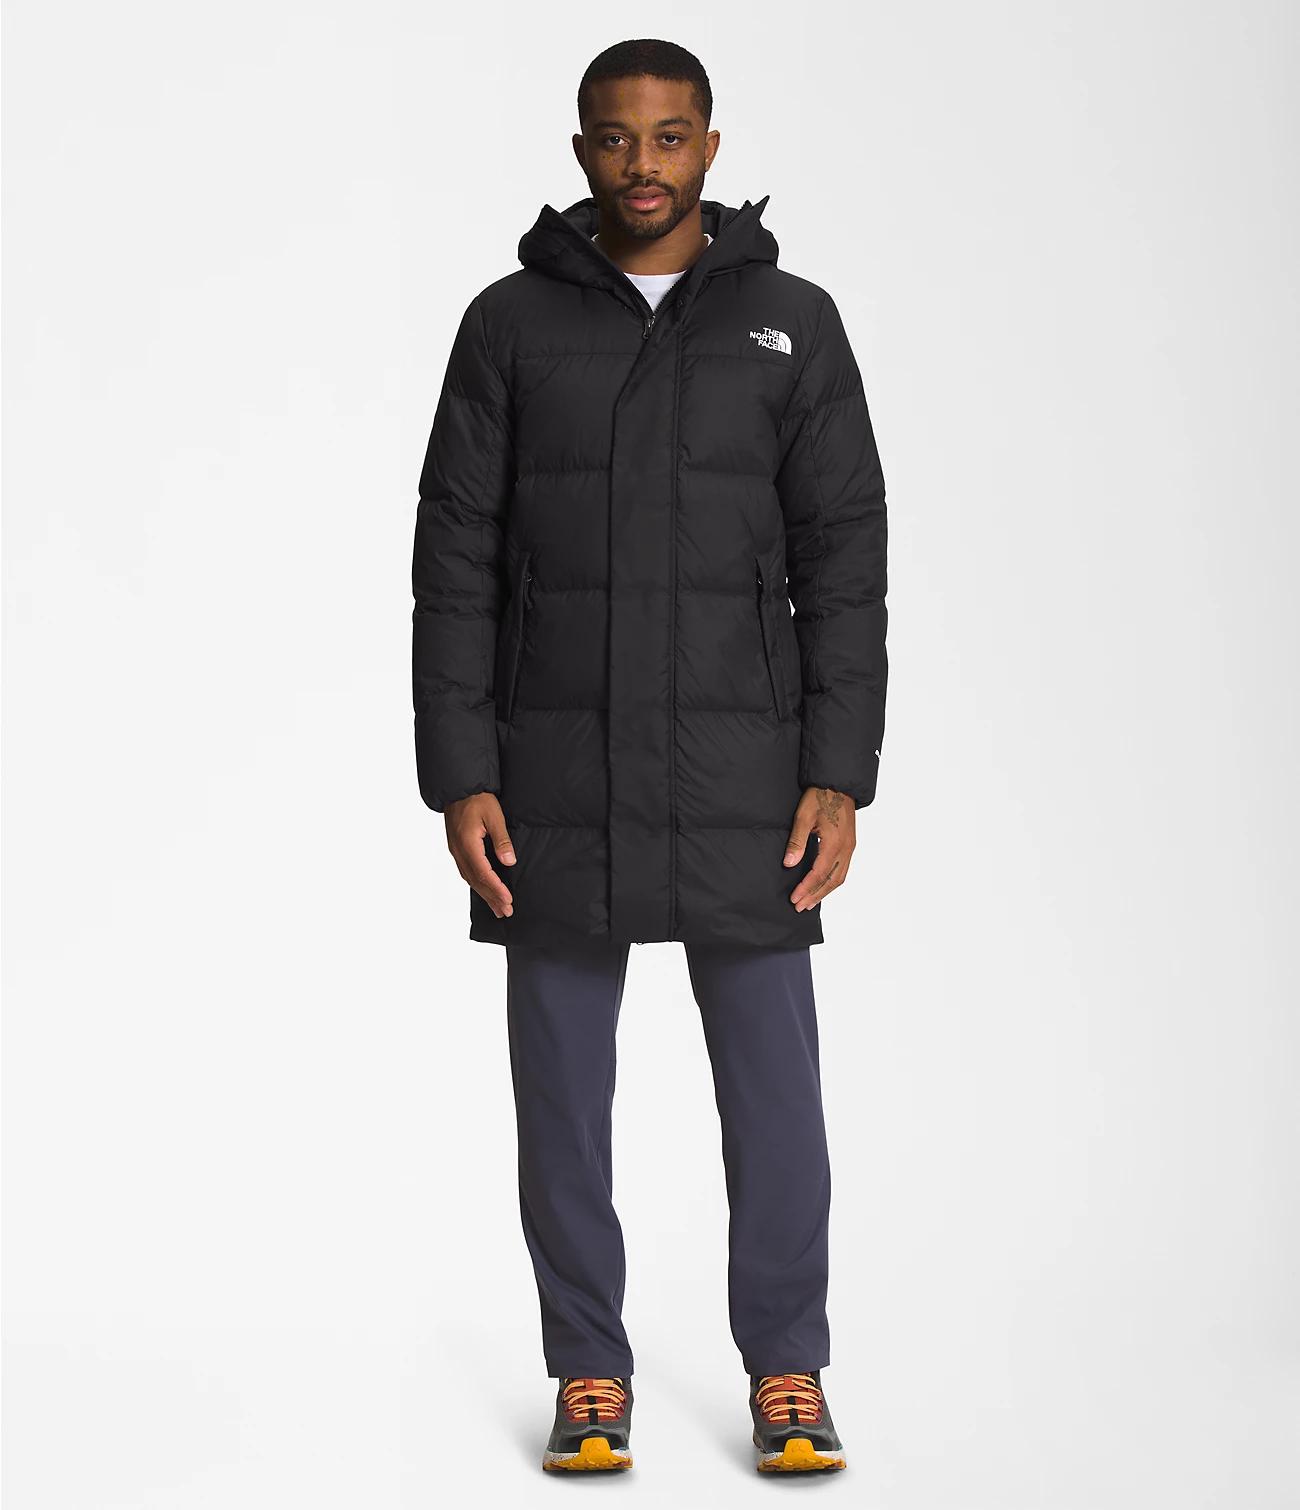 Men’s Hydrenalite™ Down Mid by THE NORTH FACE | jellibeans